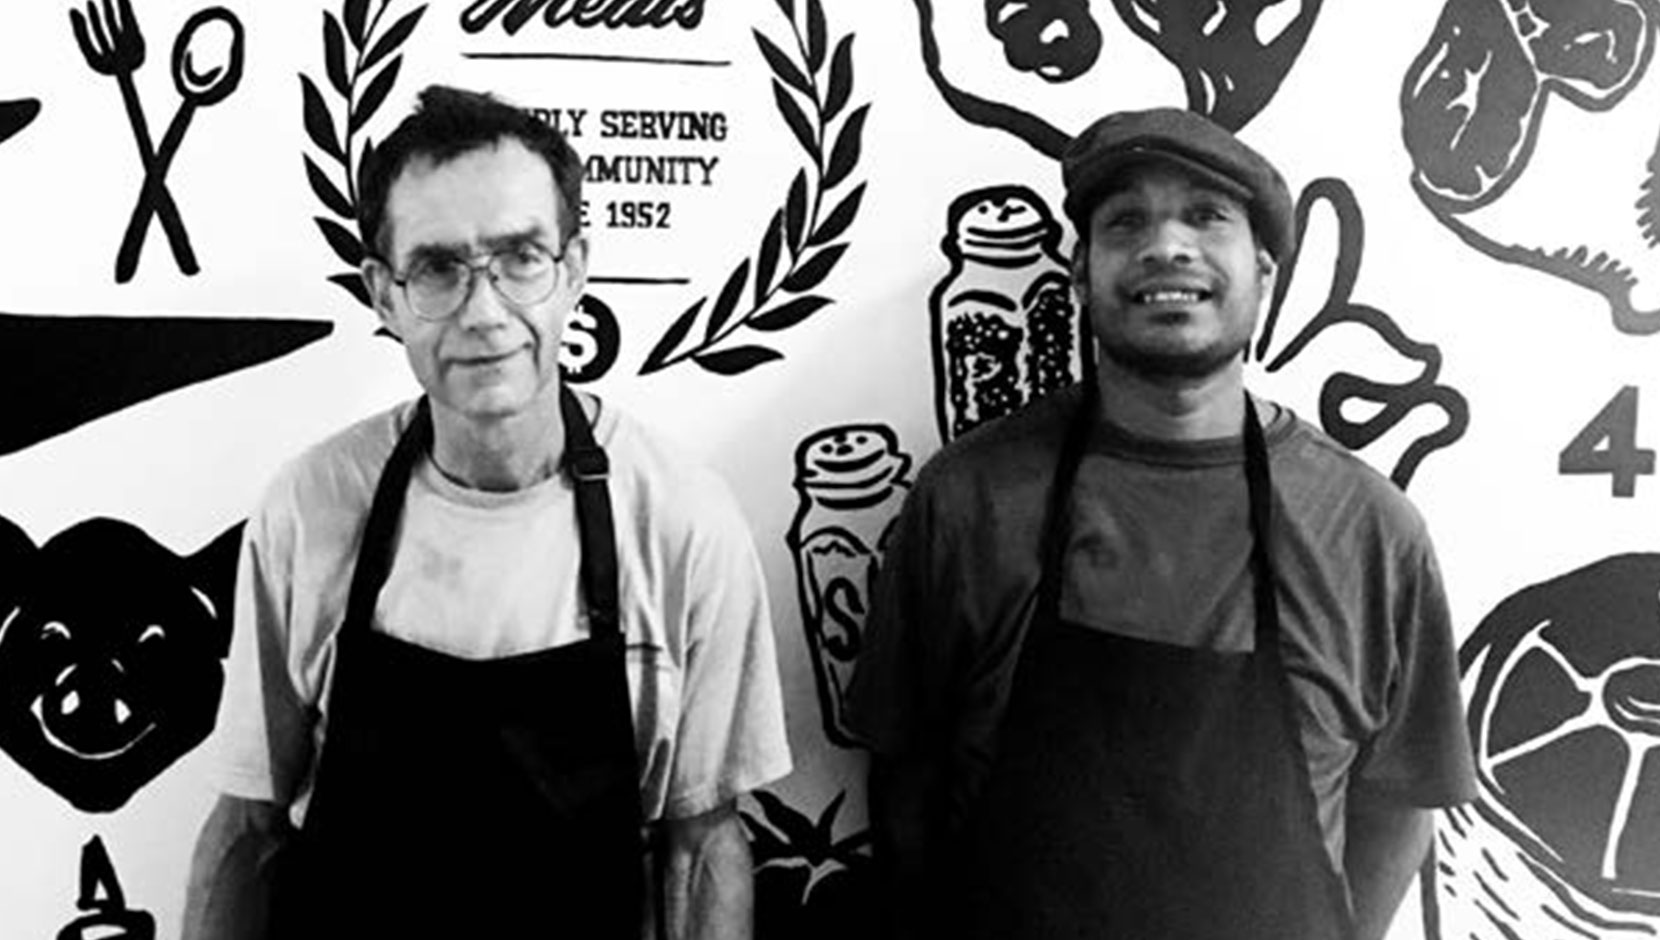 Brad and Randy leaning on a wall inside Save on Meats with an artistic food-related pattern. They're both older men and smiling. Image is in black and white.